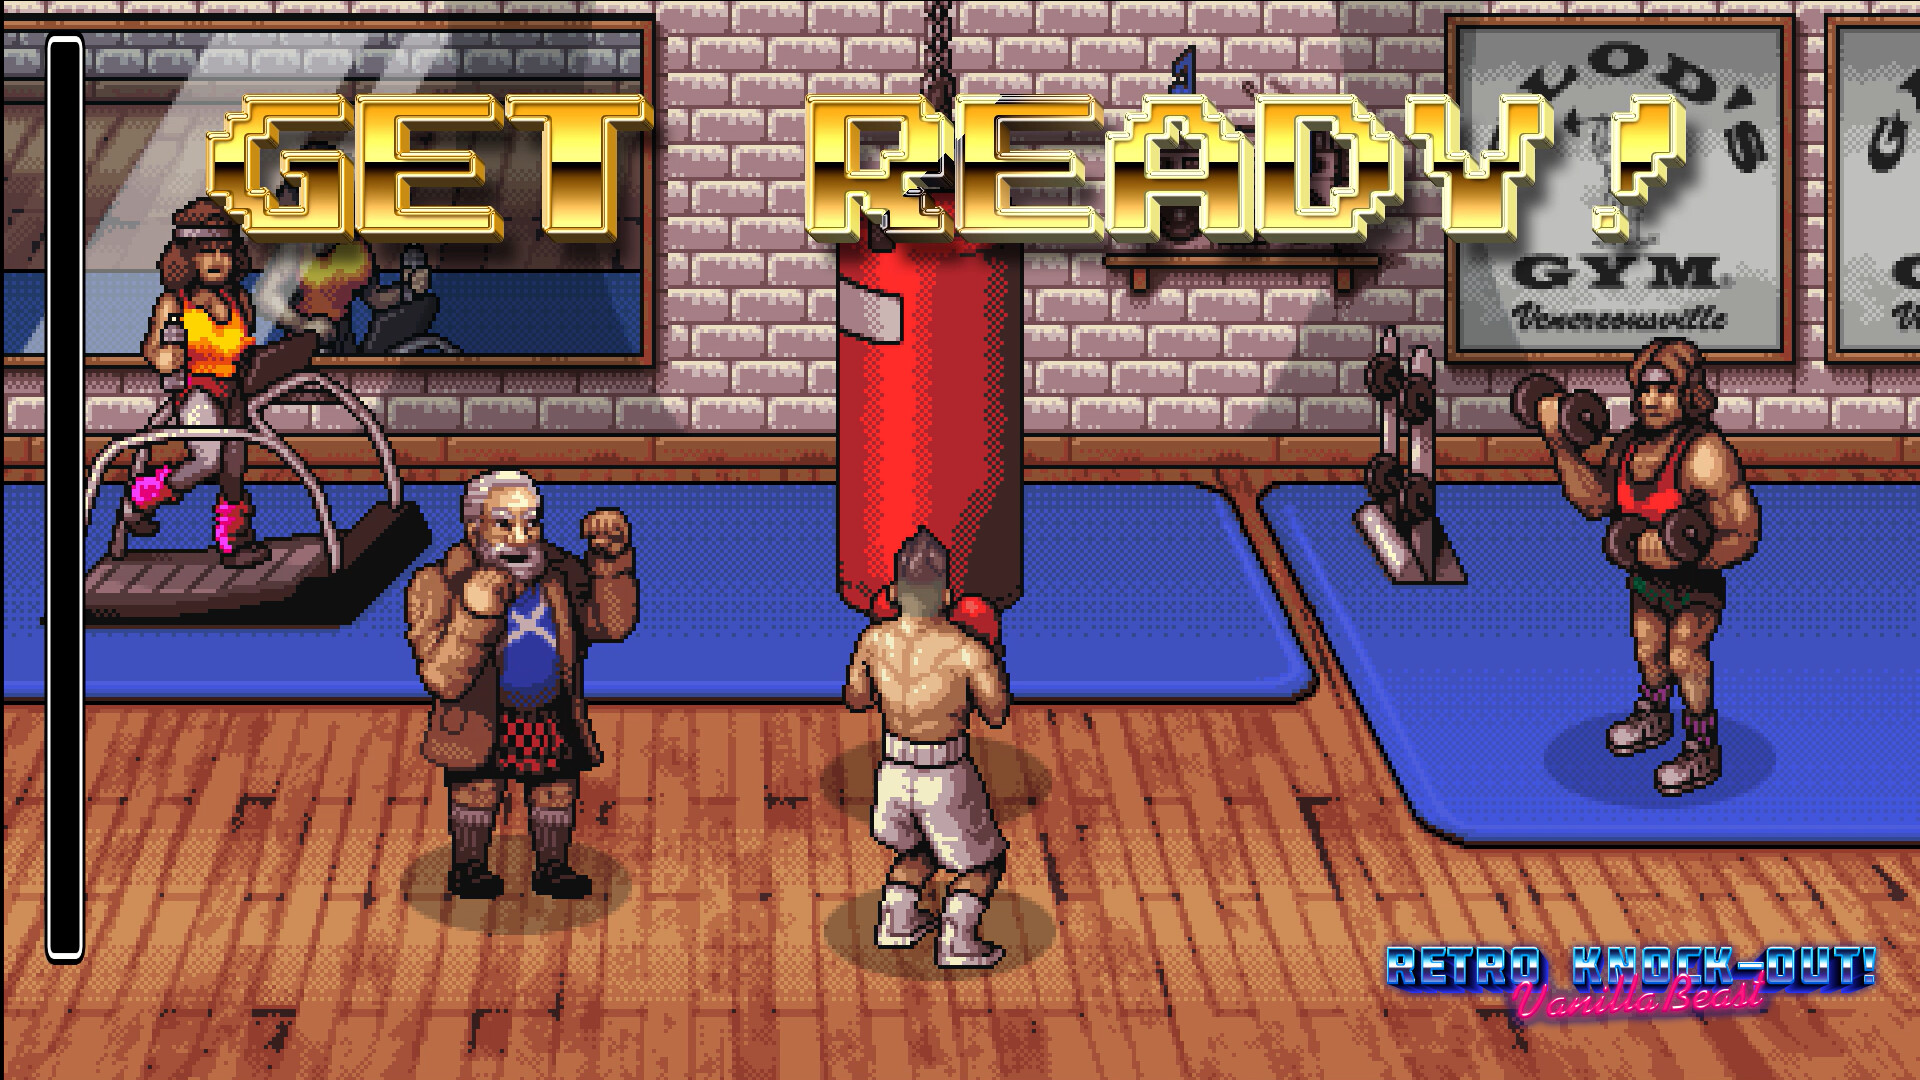 Save 25% on VanillaBeast: Retro Knock-Out! on Steam